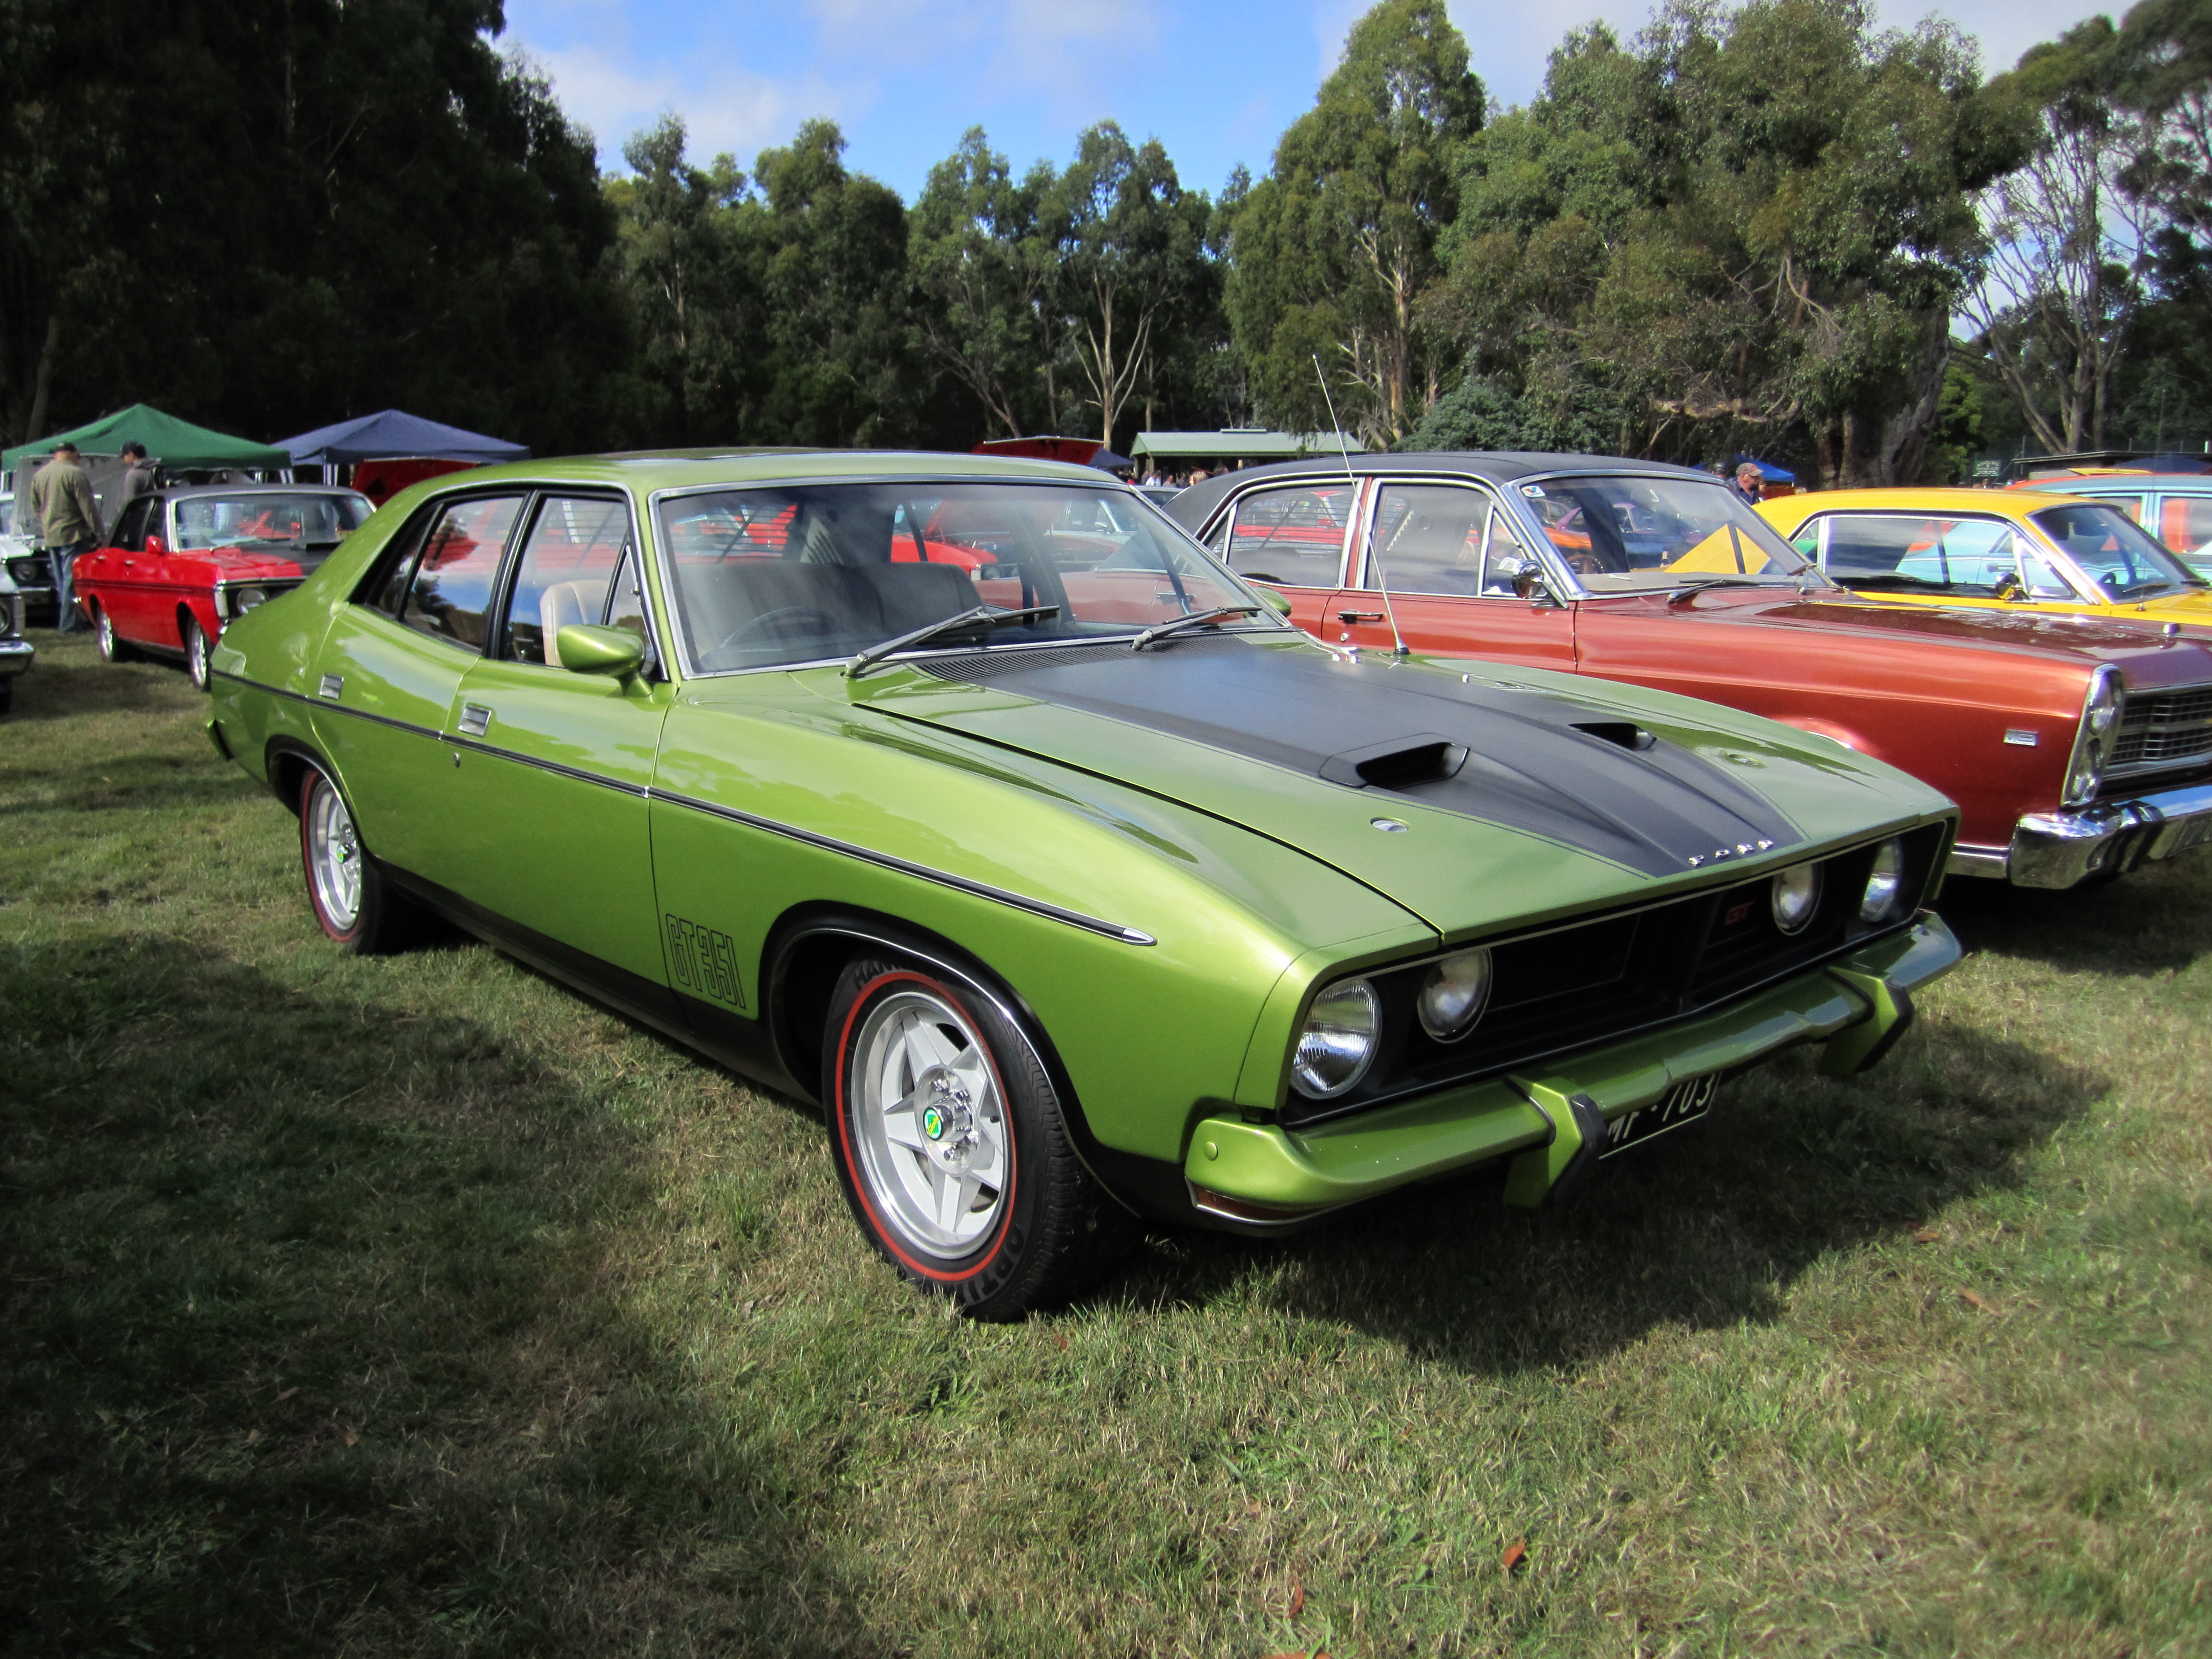 Ford_Falcon_XB_GT_Sedan_Frosted_Lime.jpg